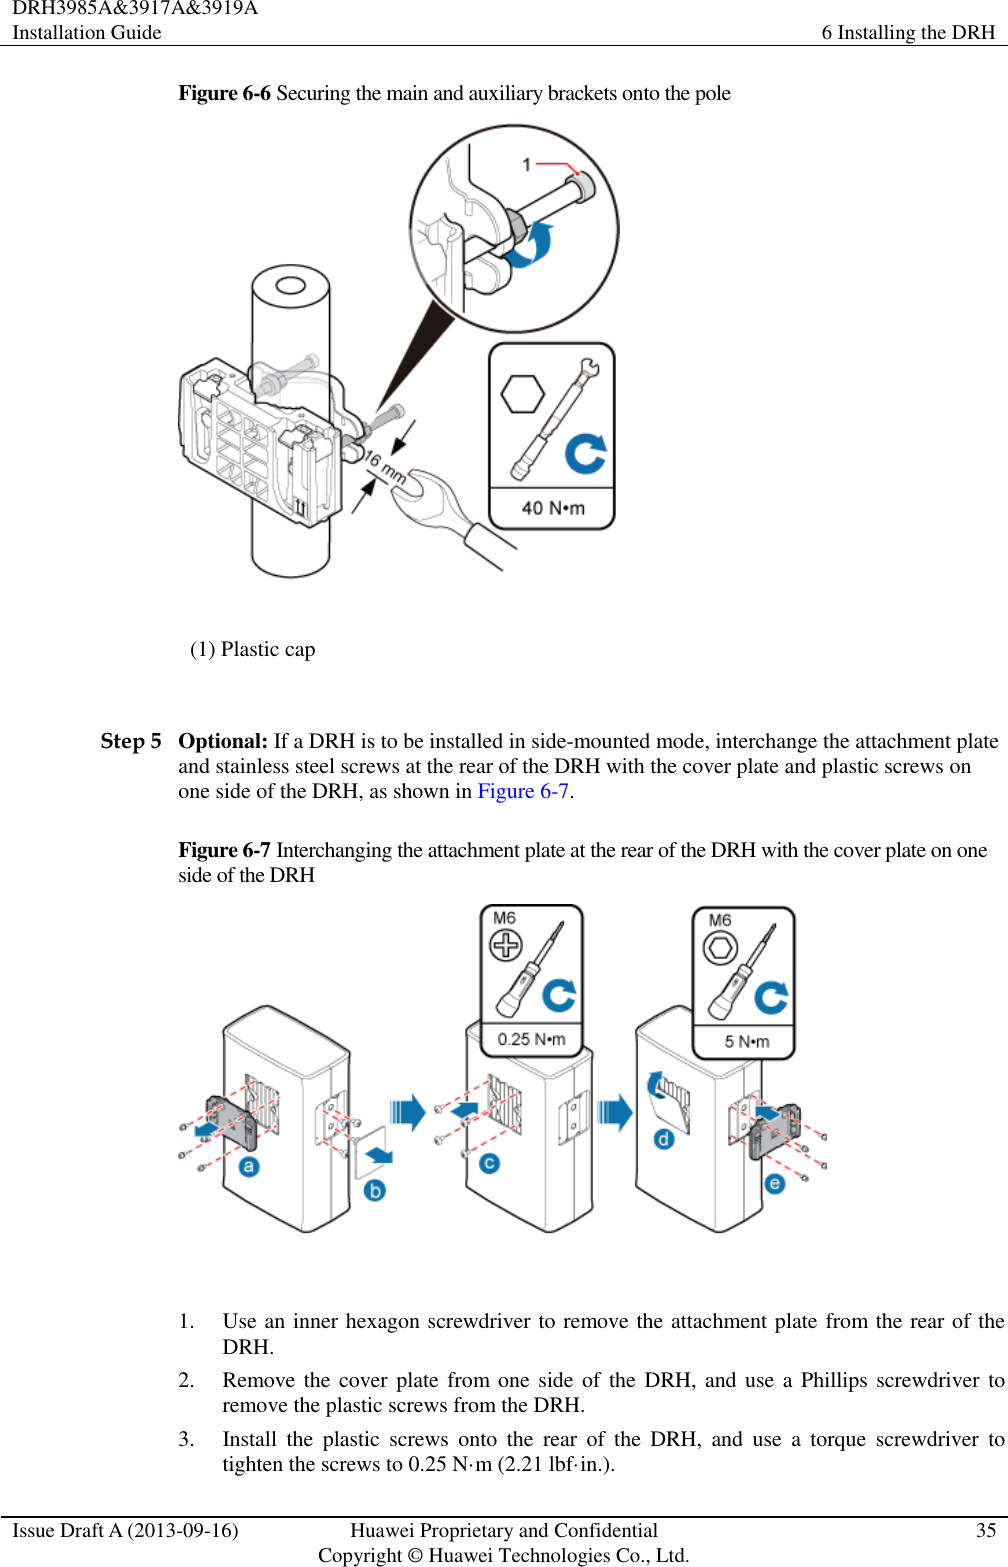 DRH3985A&amp;3917A&amp;3919A Installation Guide 6 Installing the DRH  Issue Draft A (2013-09-16) Huawei Proprietary and Confidential                                     Copyright © Huawei Technologies Co., Ltd. 35  Figure 6-6 Securing the main and auxiliary brackets onto the pole  (1) Plastic cap  Step 5 Optional: If a DRH is to be installed in side-mounted mode, interchange the attachment plate and stainless steel screws at the rear of the DRH with the cover plate and plastic screws on one side of the DRH, as shown in Figure 6-7. Figure 6-7 Interchanging the attachment plate at the rear of the DRH with the cover plate on one side of the DRH   1. Use an inner hexagon screwdriver to remove the attachment plate from the rear of the DRH. 2. Remove the cover plate from one  side of  the DRH,  and use a Phillips screwdriver to remove the plastic screws from the DRH. 3. Install  the  plastic  screws  onto  the  rear  of  the  DRH,  and  use  a  torque  screwdriver  to tighten the screws to 0.25 N·m (2.21 lbf·in.). 